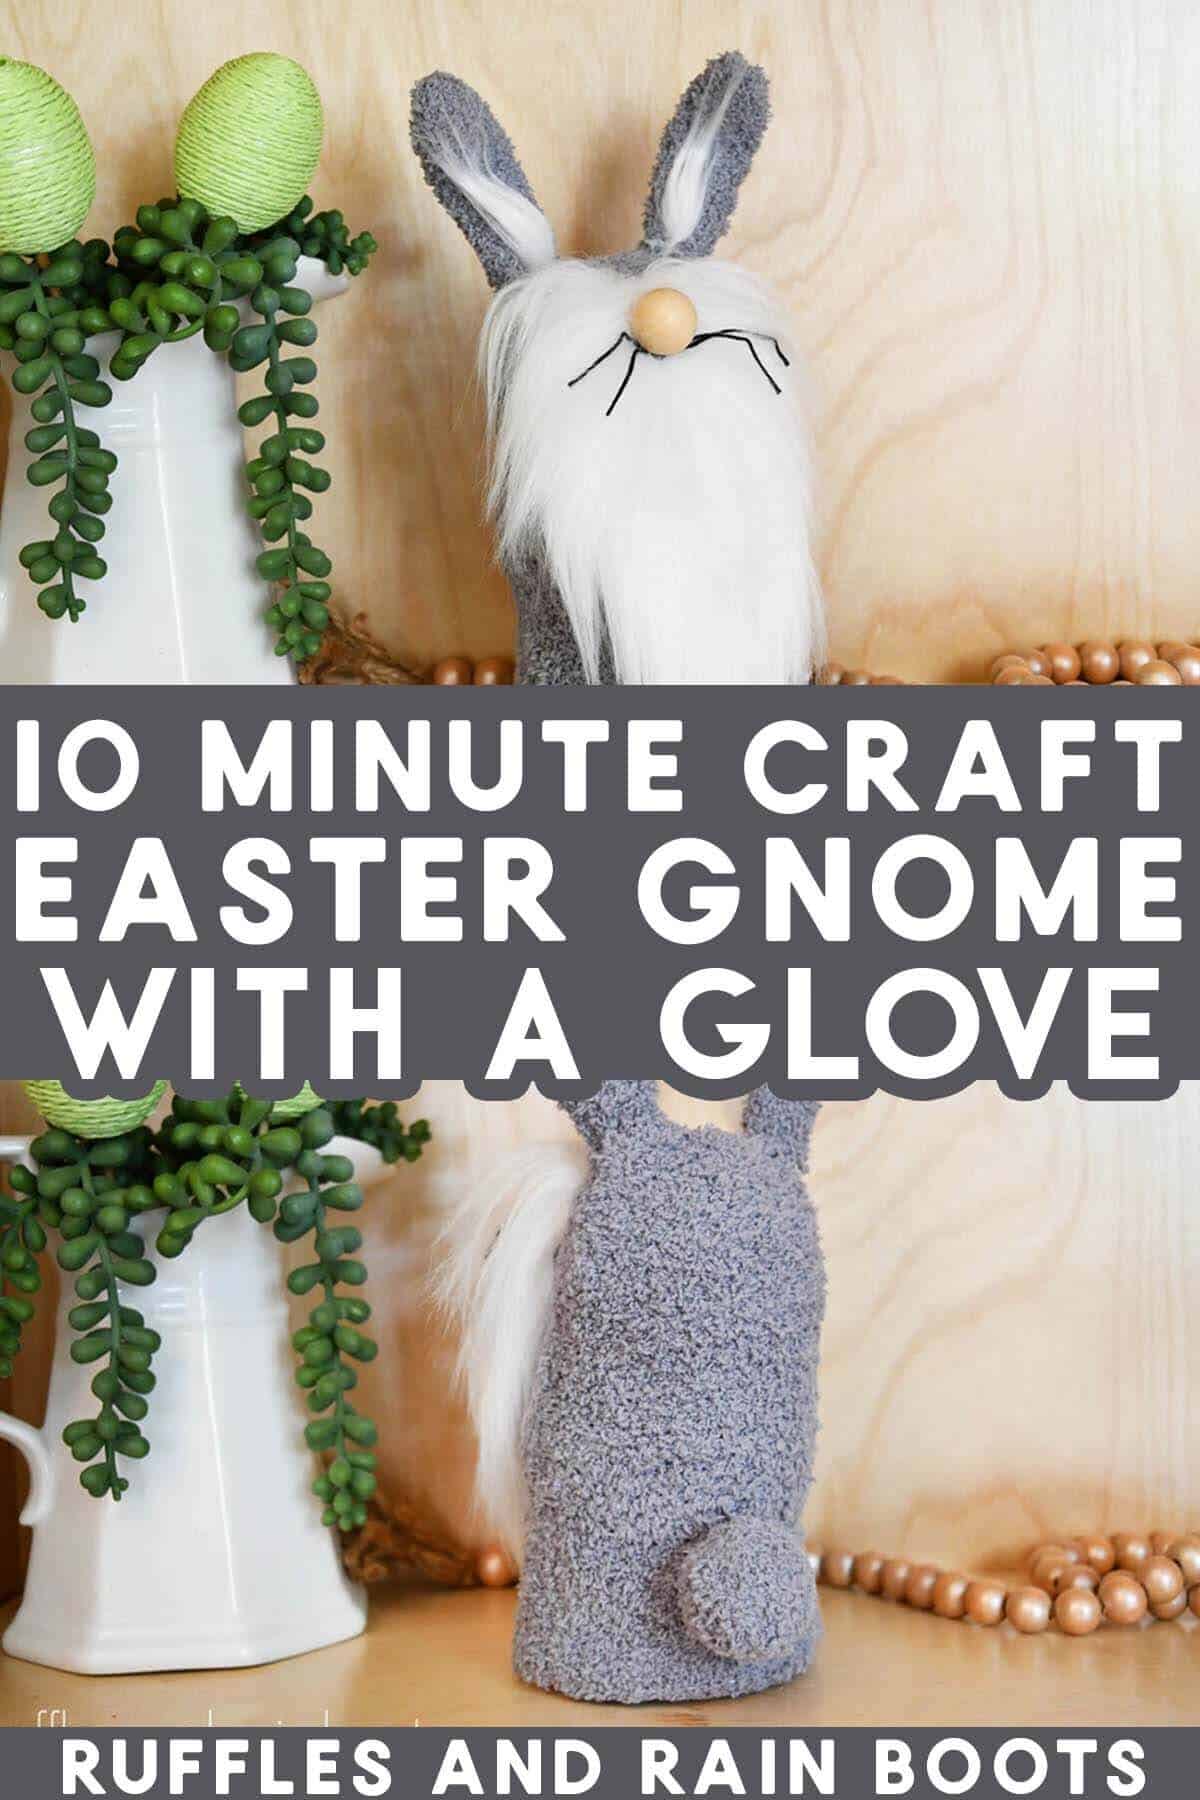 Split image of the front and back of a cute bunny gnome with posable ears and text which reads 10 minute Easter gnome with a glove.